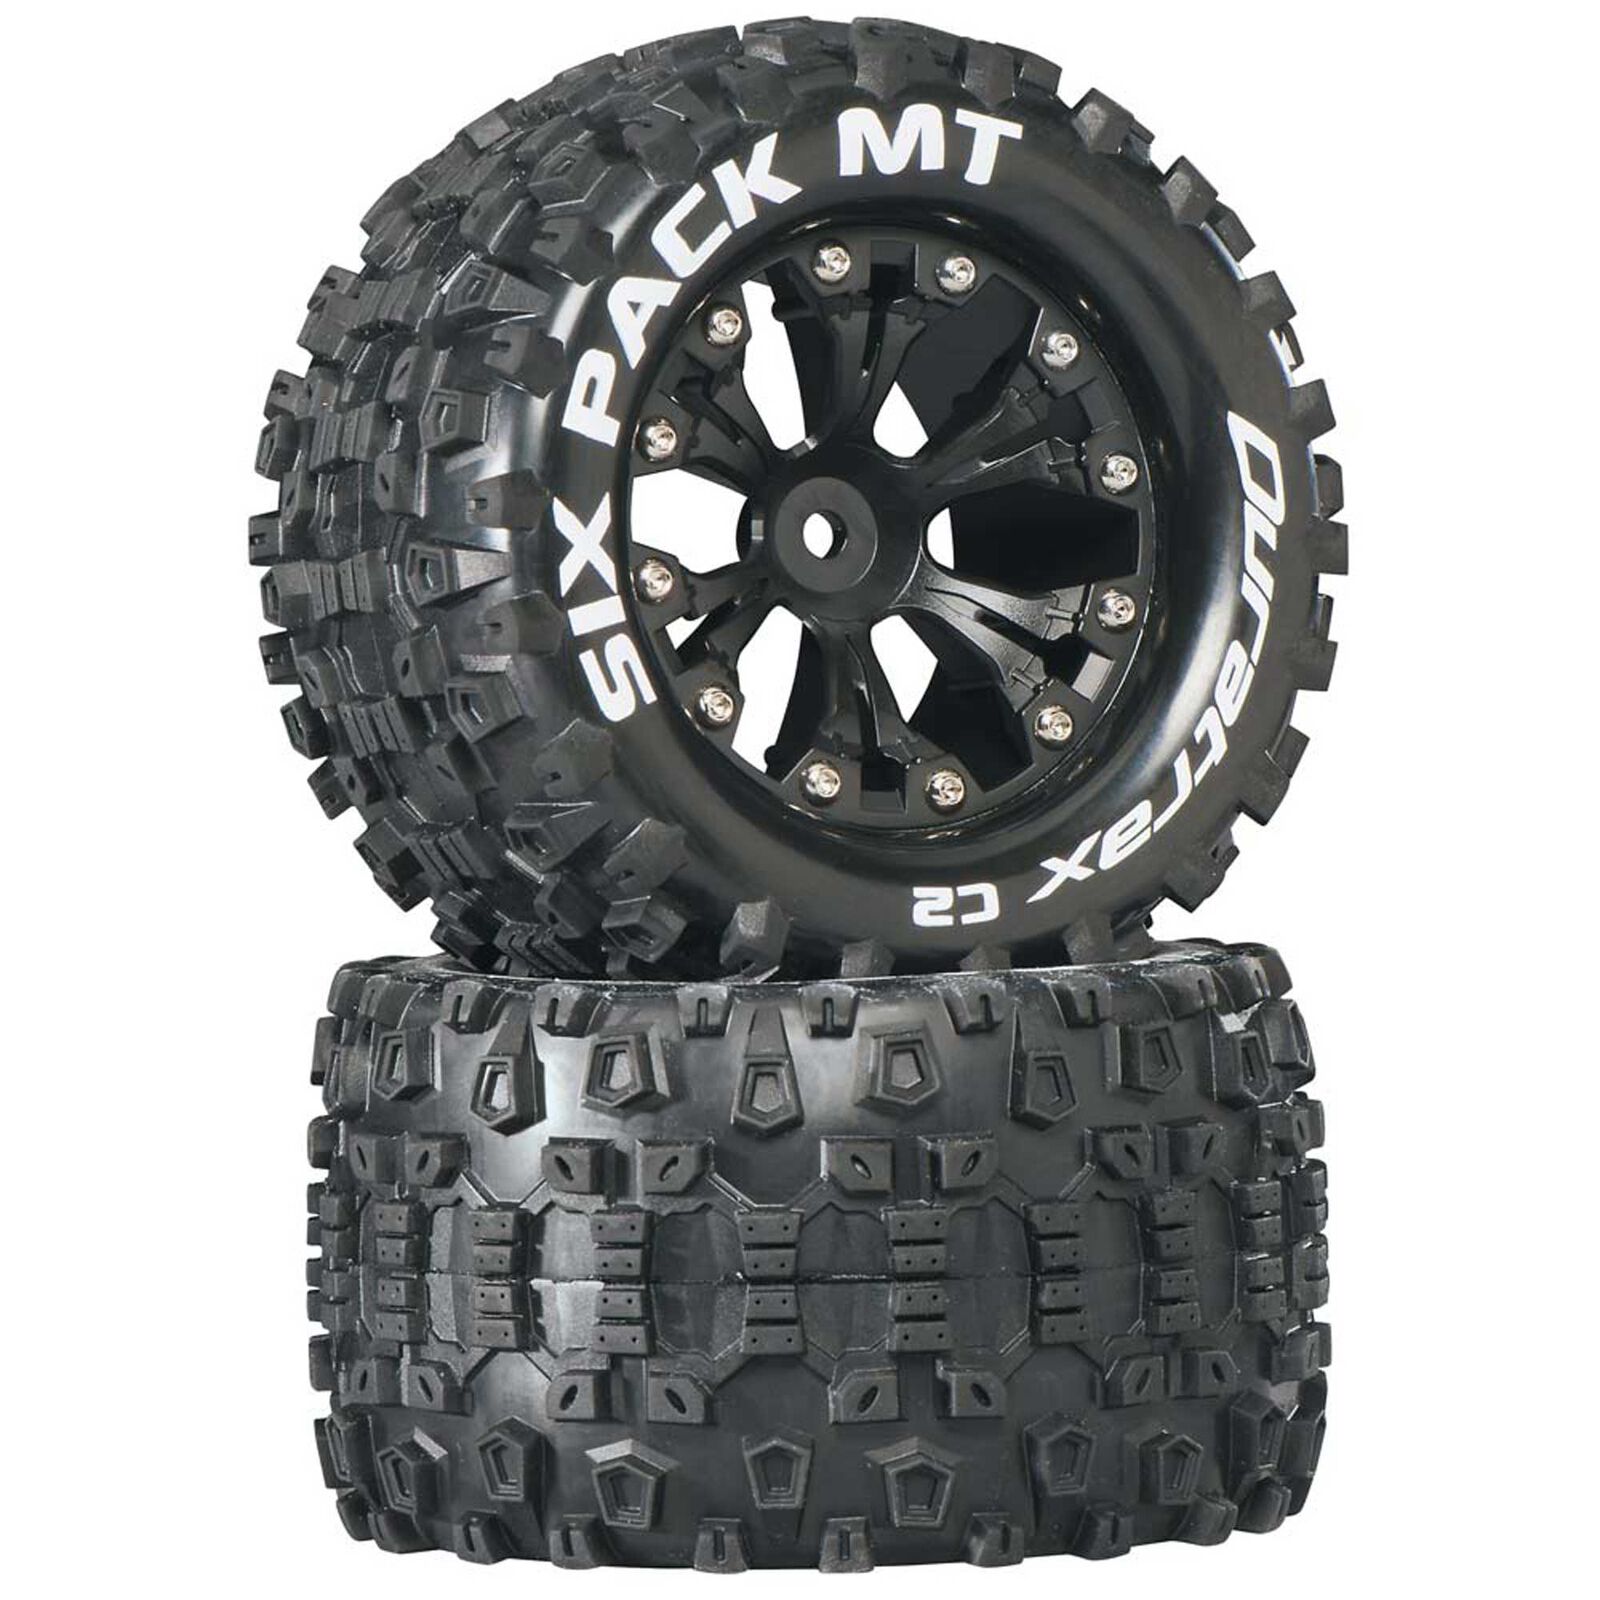 Six-Pack MT 2.8" 2WD Mounted Rear C2 Tires, Black (2)